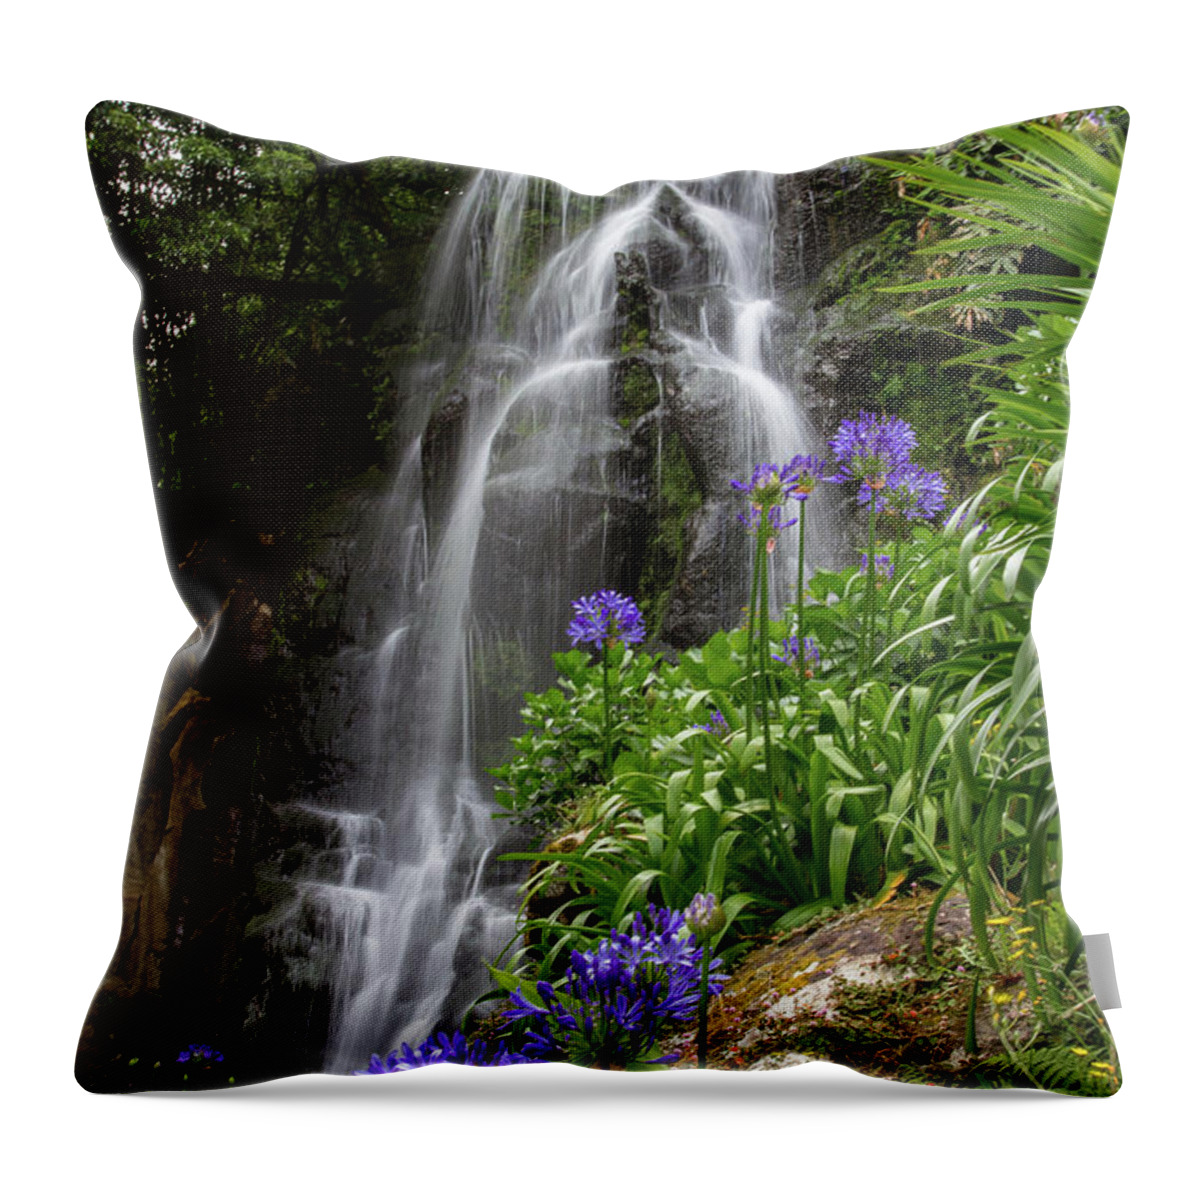 Nordeste Throw Pillow featuring the photograph Waterfall with Flowers by Denise Kopko